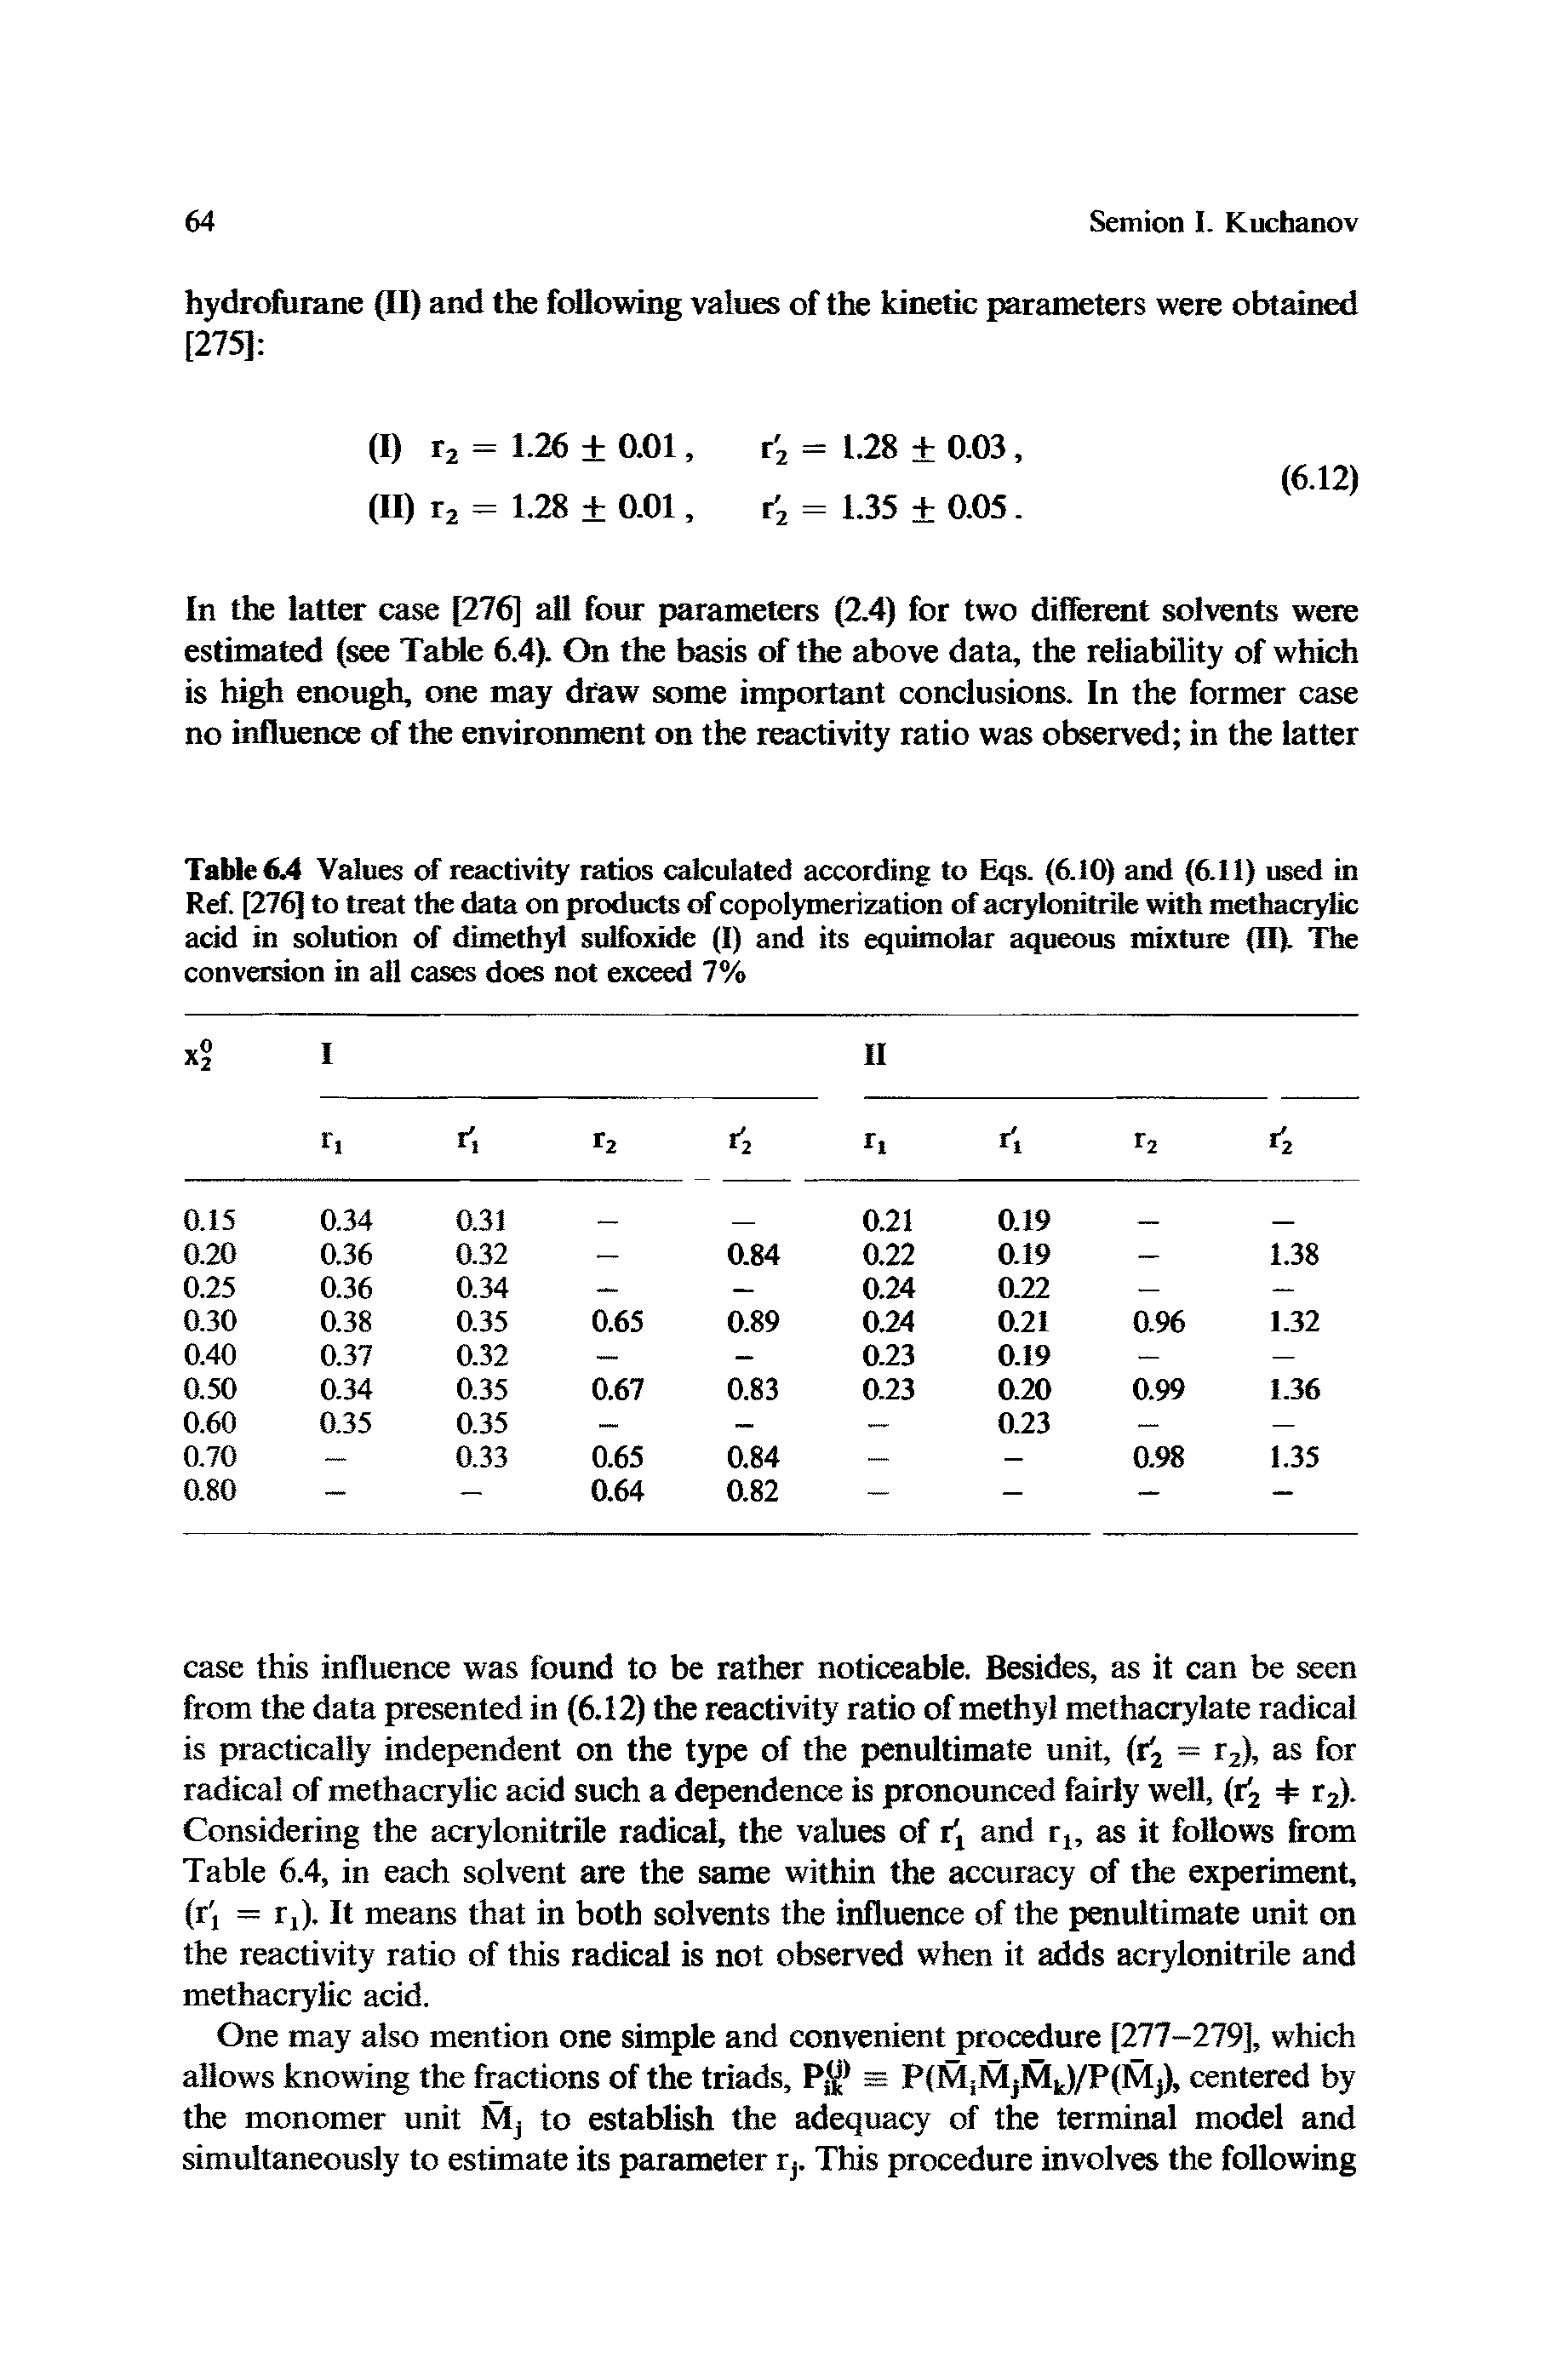 Table 64 Values of reactivity ratios calculated according to Eqs. (6.10) and (6.11) used in Ref. [276] to treat the data on products of copolymerization of acrylonitrile with methacrylic acid in solution of dimethyl sulfoxide (I) and its equimolar aqueous mixture (III The conversion in all cases does not exceed 7%...